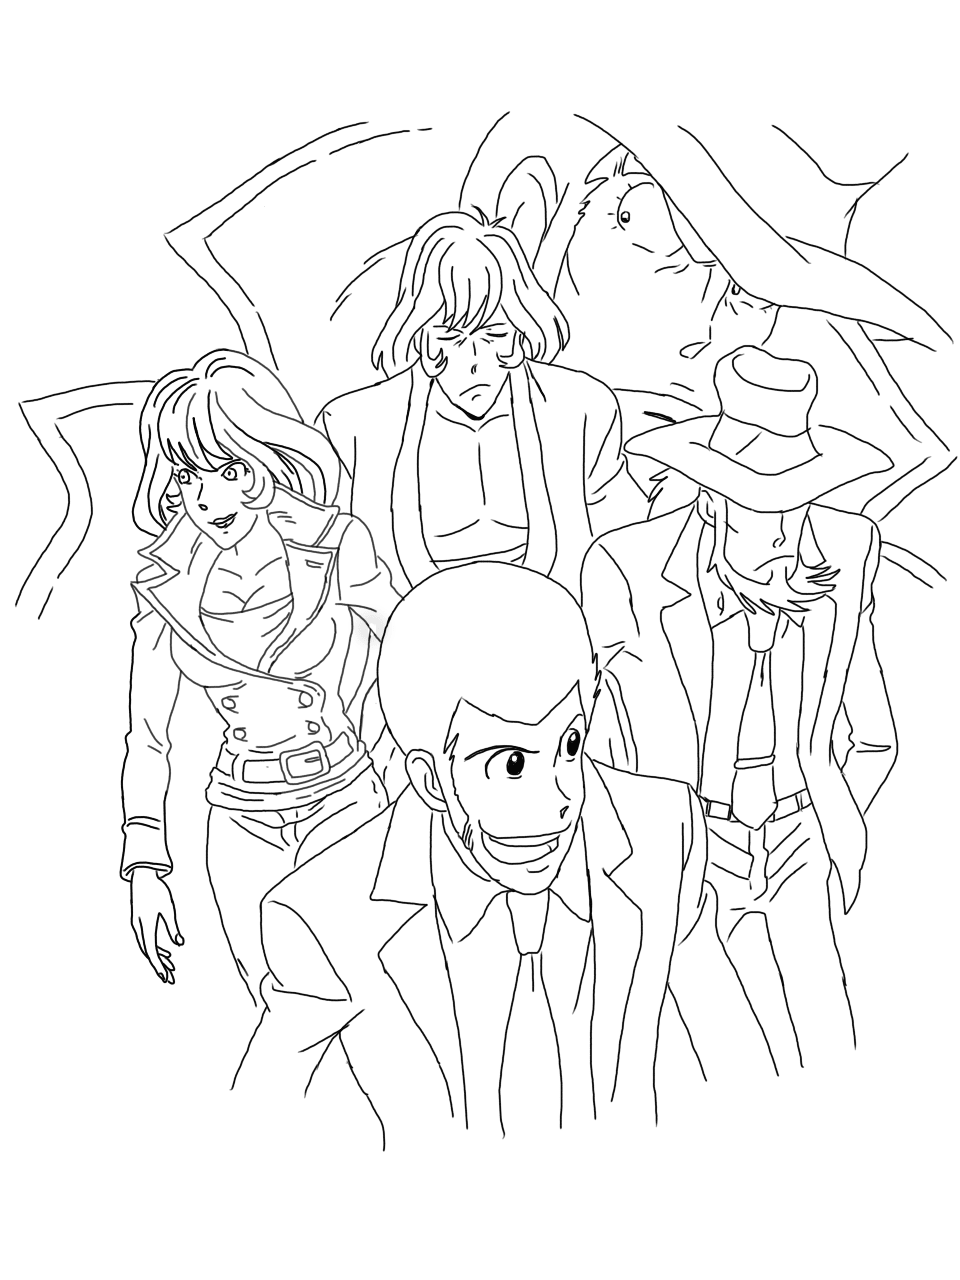 Lupin The Third Coloring Page